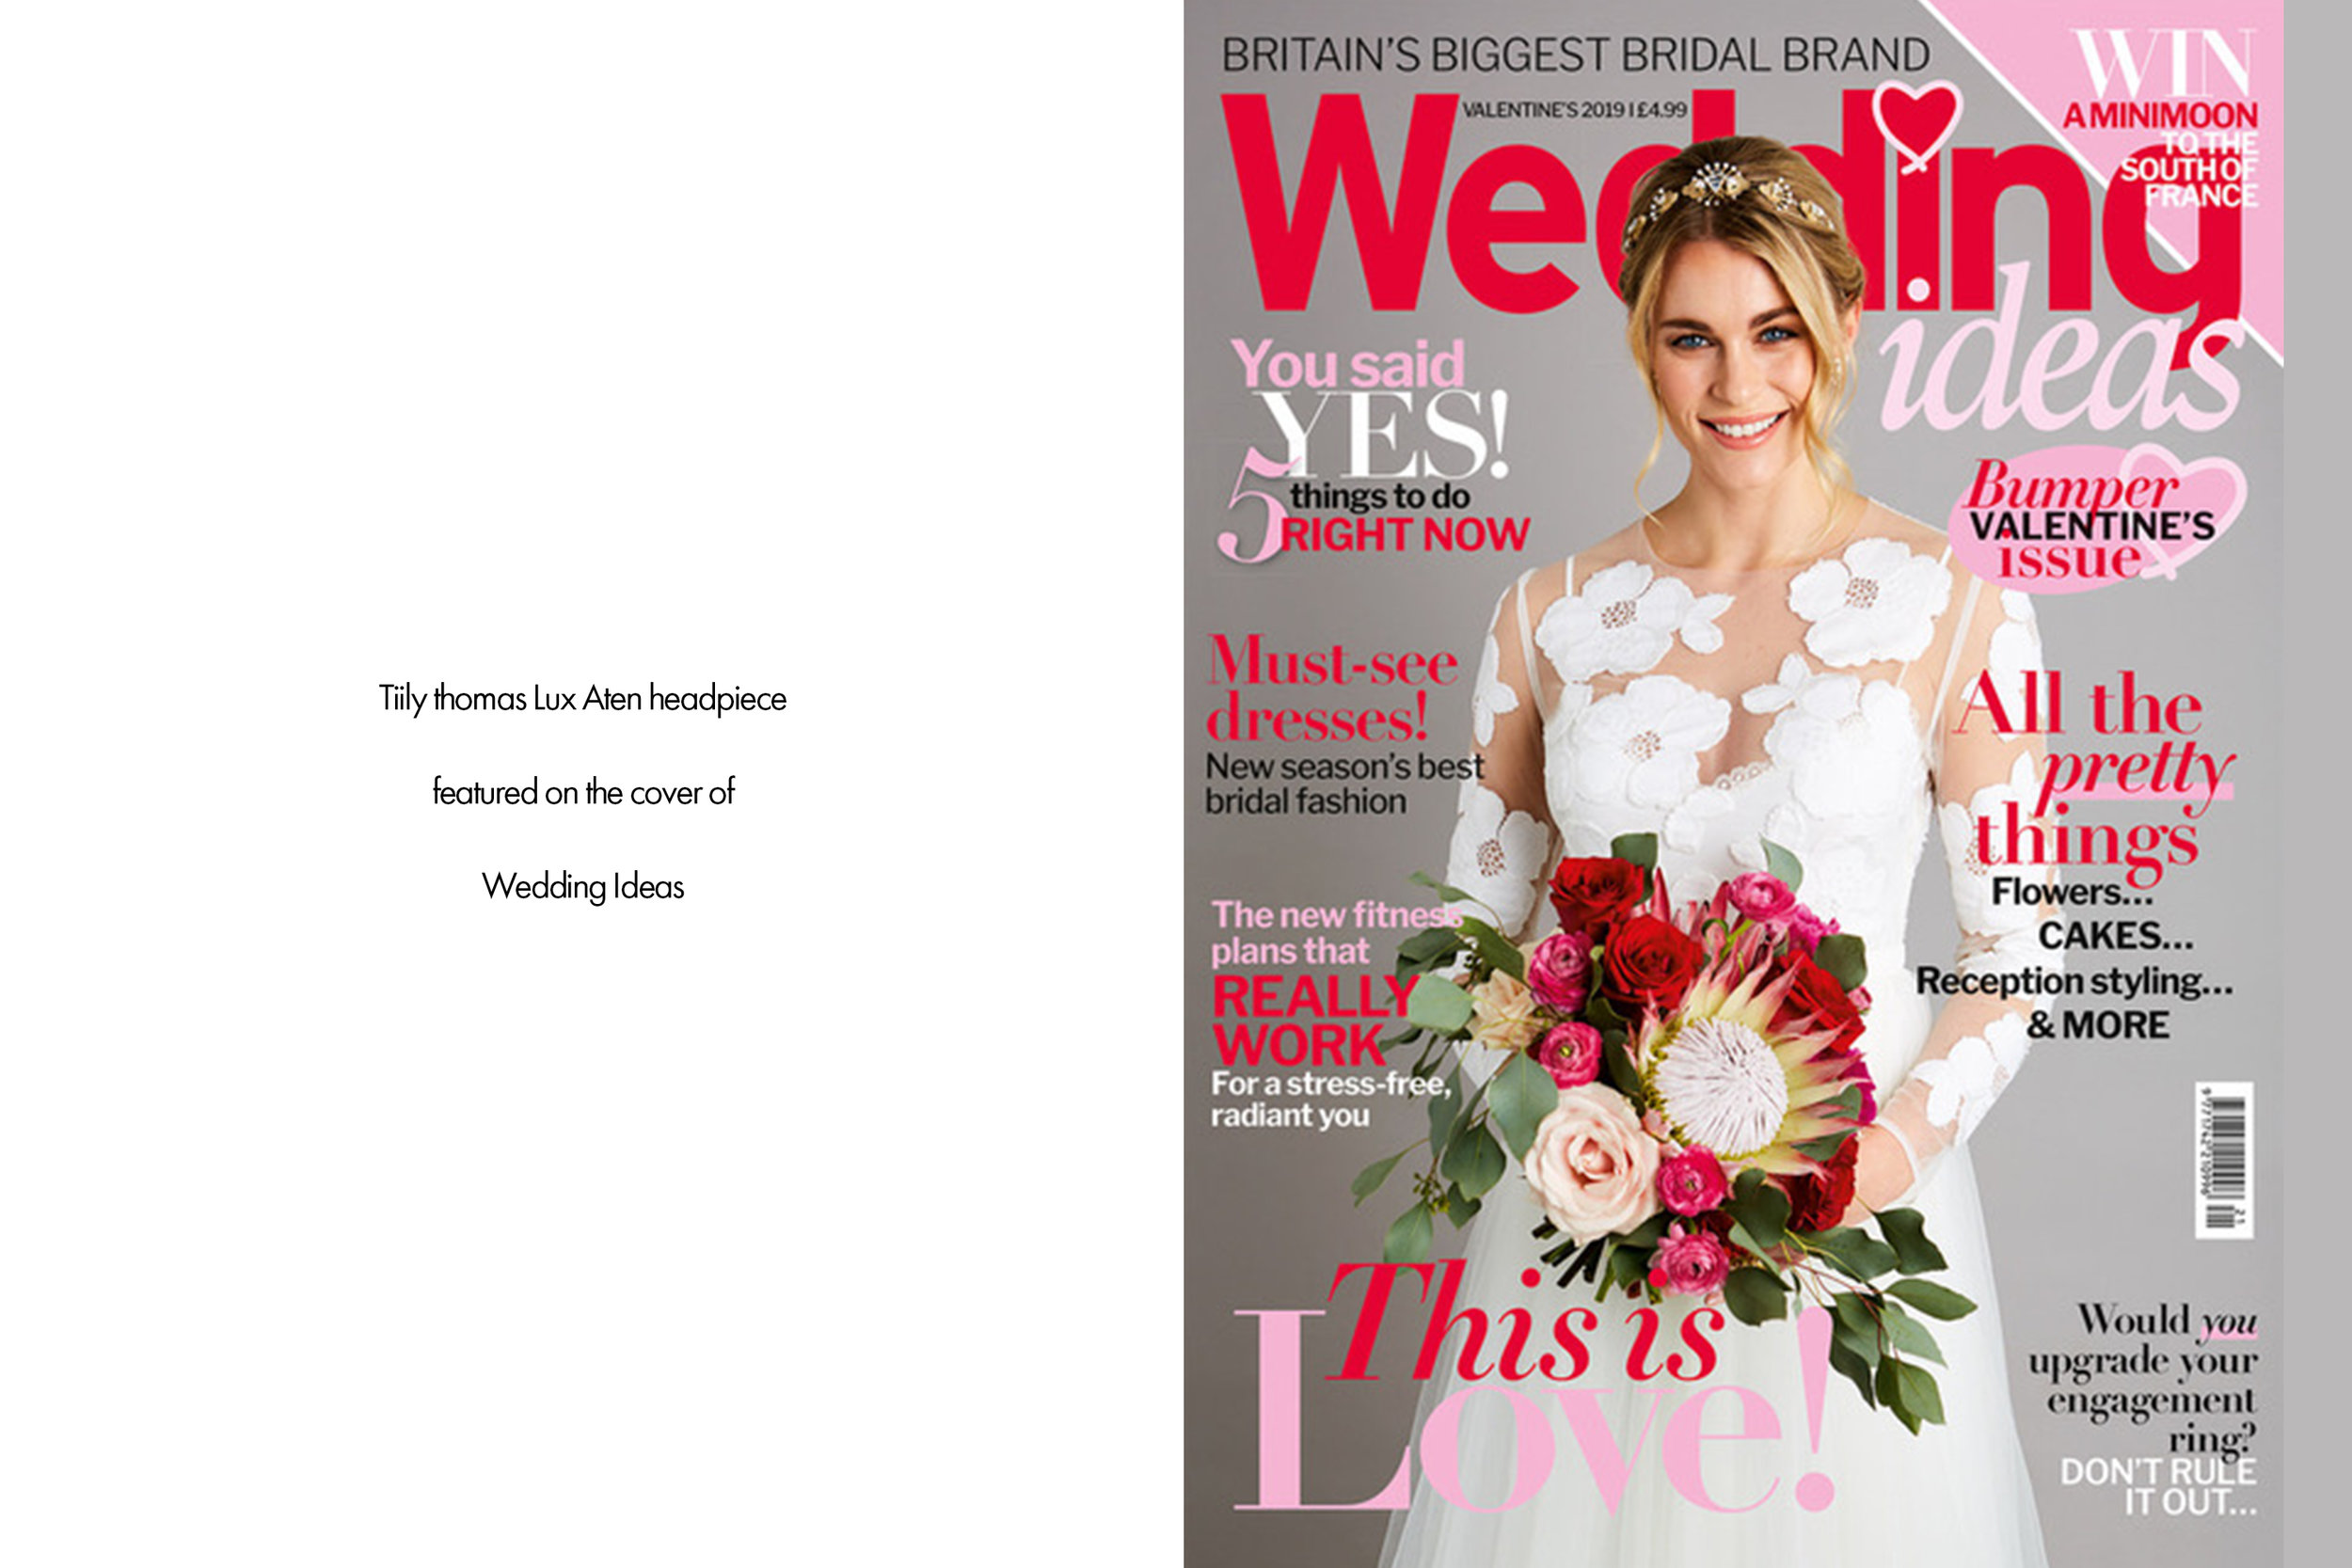 Tilly Thomas Lux Aten headpiece featured on the cover of Wedding Ideas Magazine